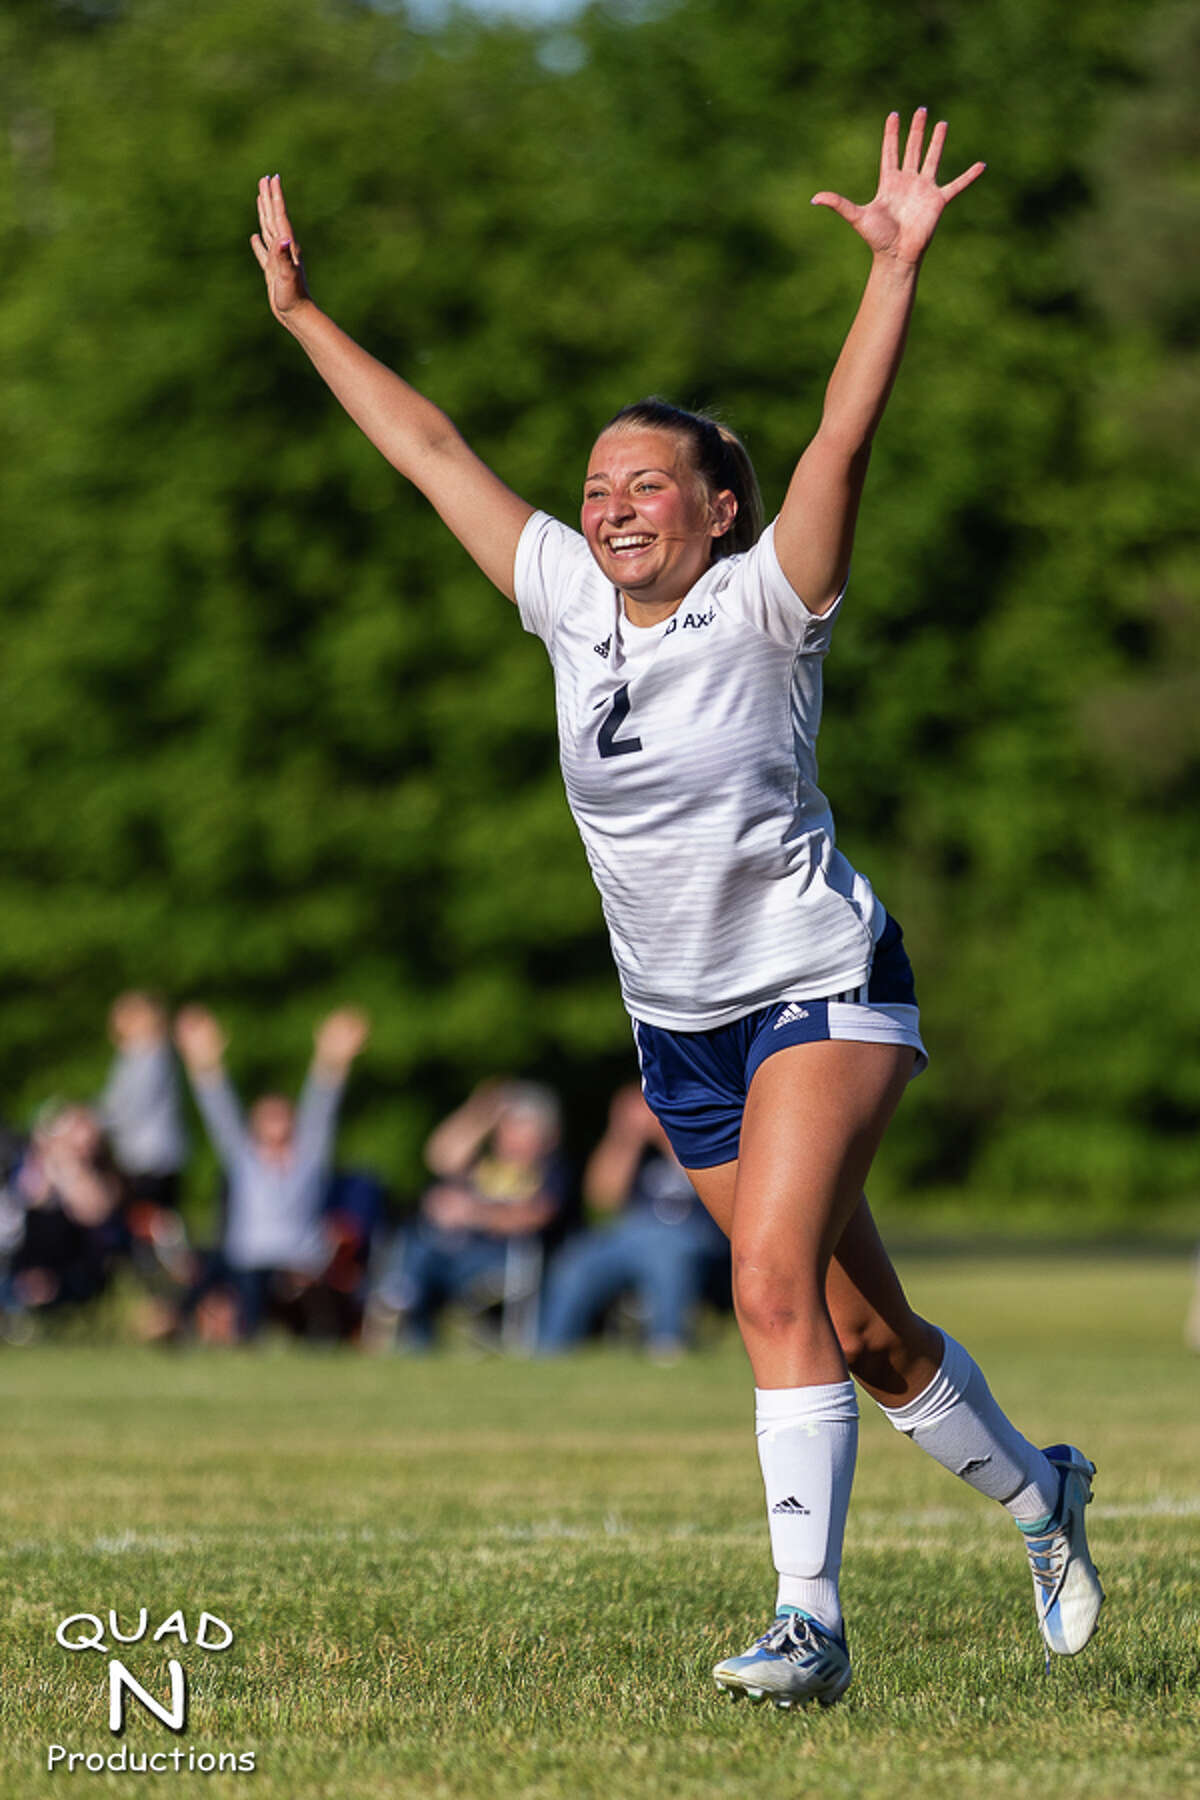 Bad Axe's Hanna Rapson scored two goals against New Haven.